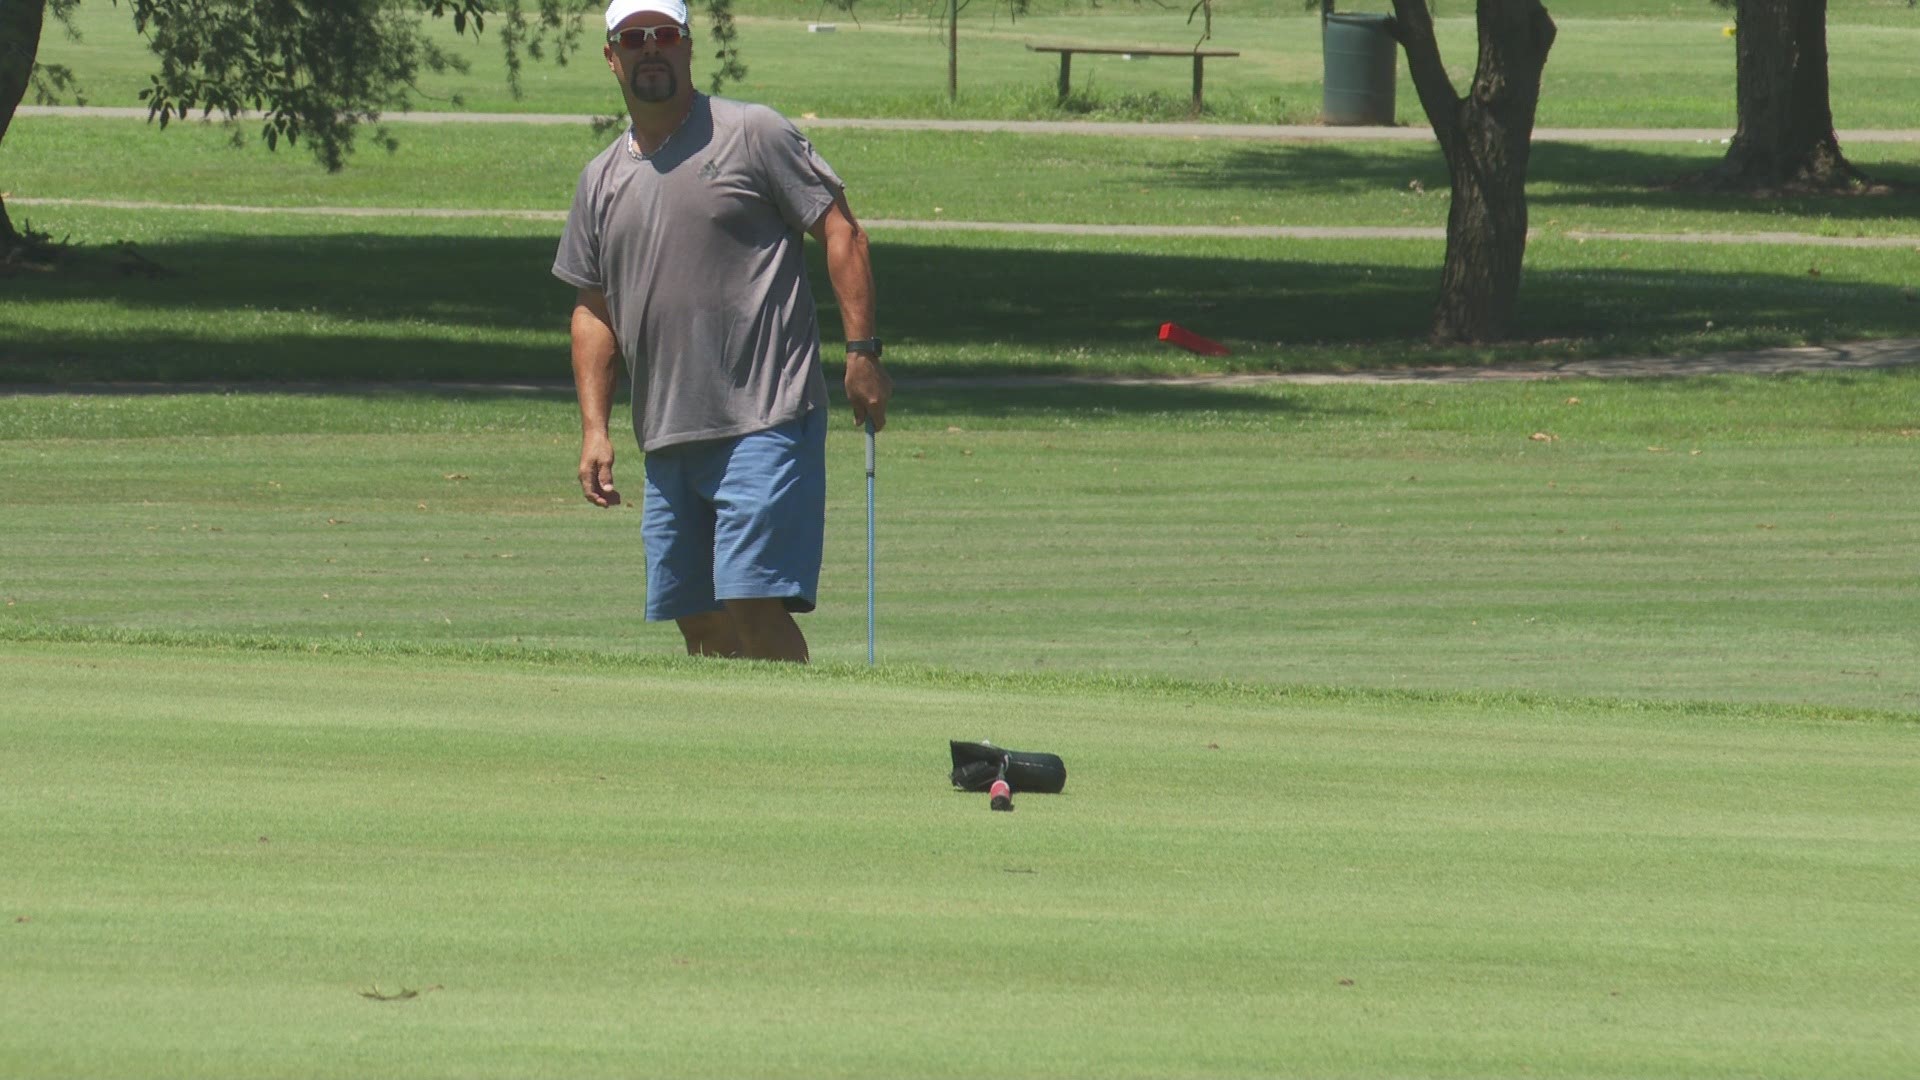 Golf has become hugely popular in the age of COVID-19. Louisville golf courses are finding a way to adapt during the pandemic.